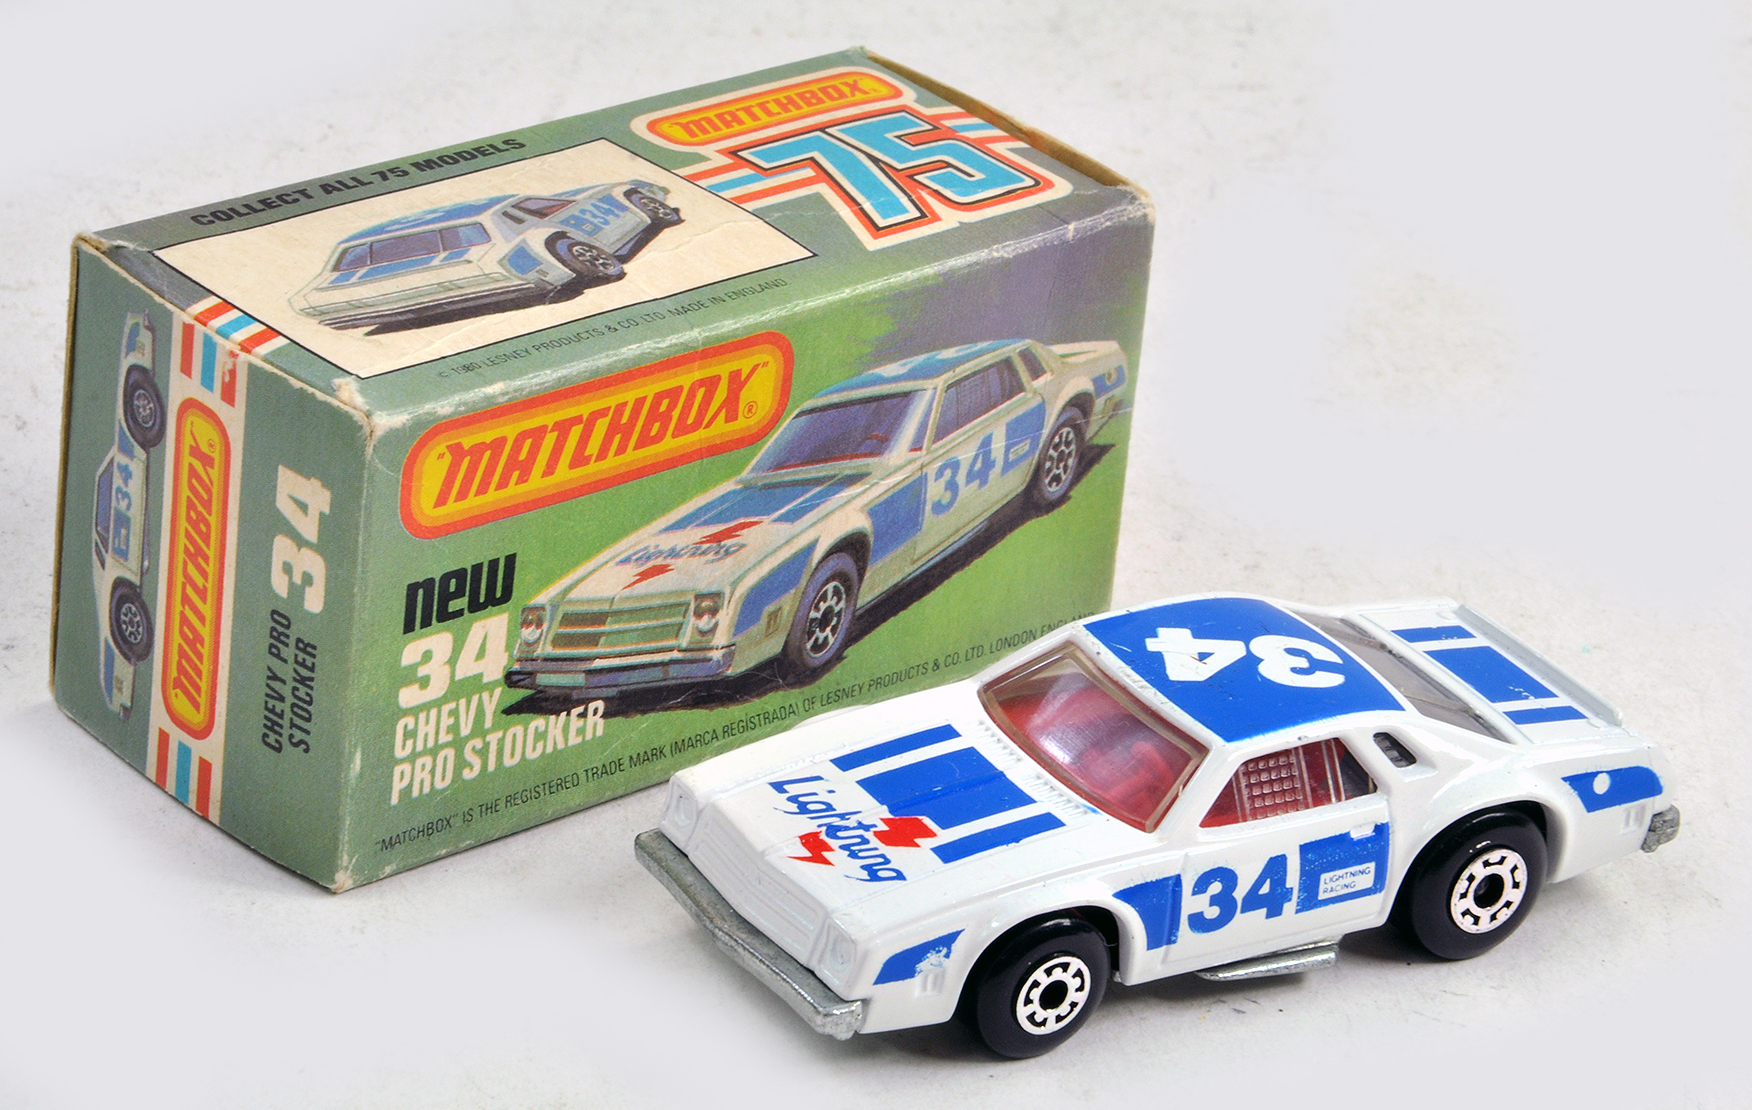 Matchbox Superfast No. 34c Chevy Pro Stocker. Appears excellent with very good to excellent box.